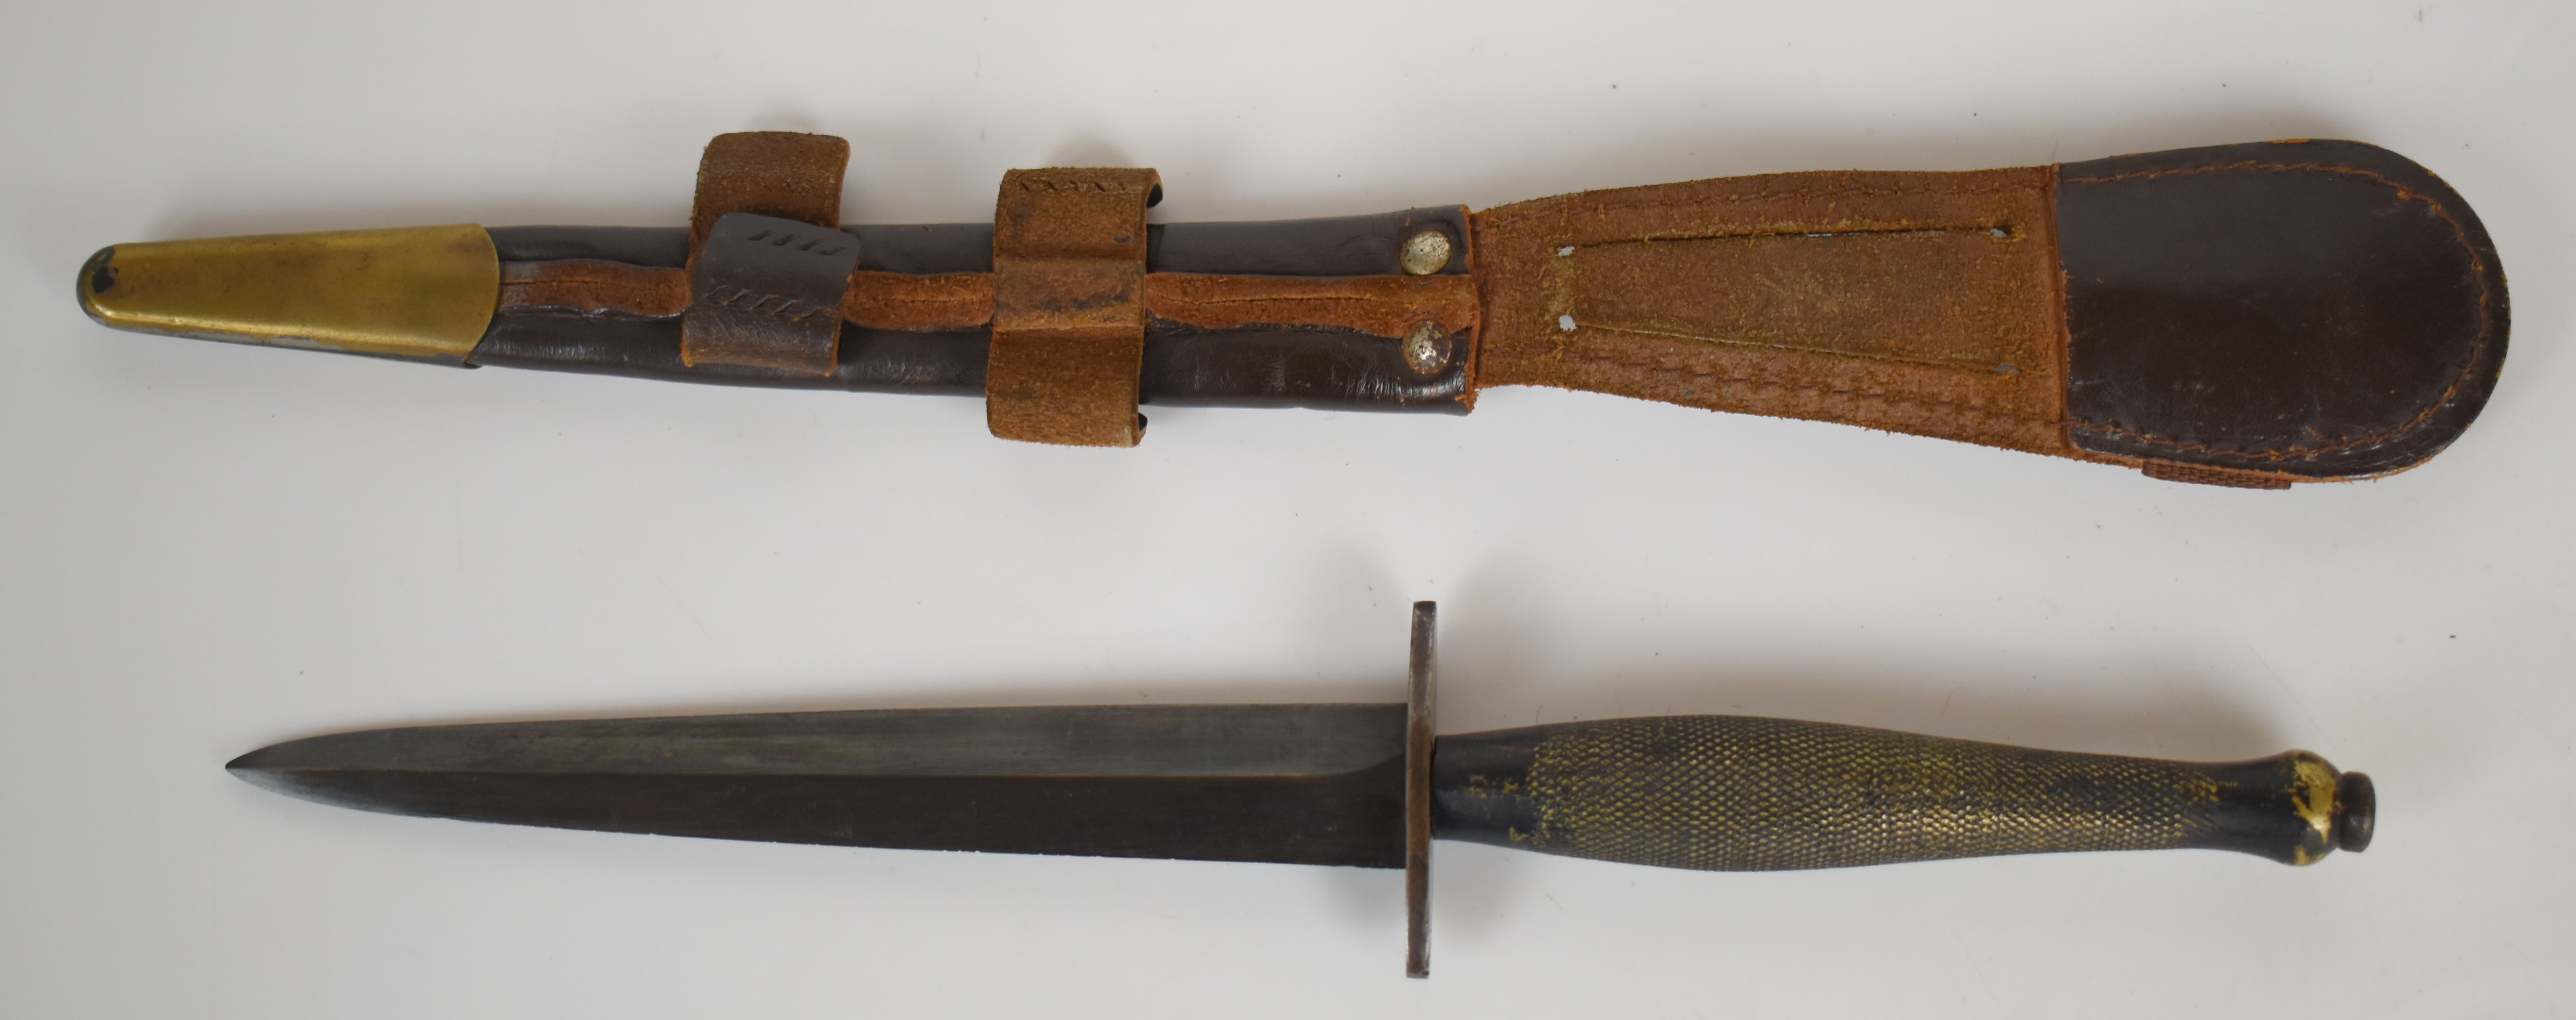 British WW2 Fairbairn Sykes 2nd pattern fighting knife stamped 82 to cross guard, with 16cm blade - Image 4 of 4